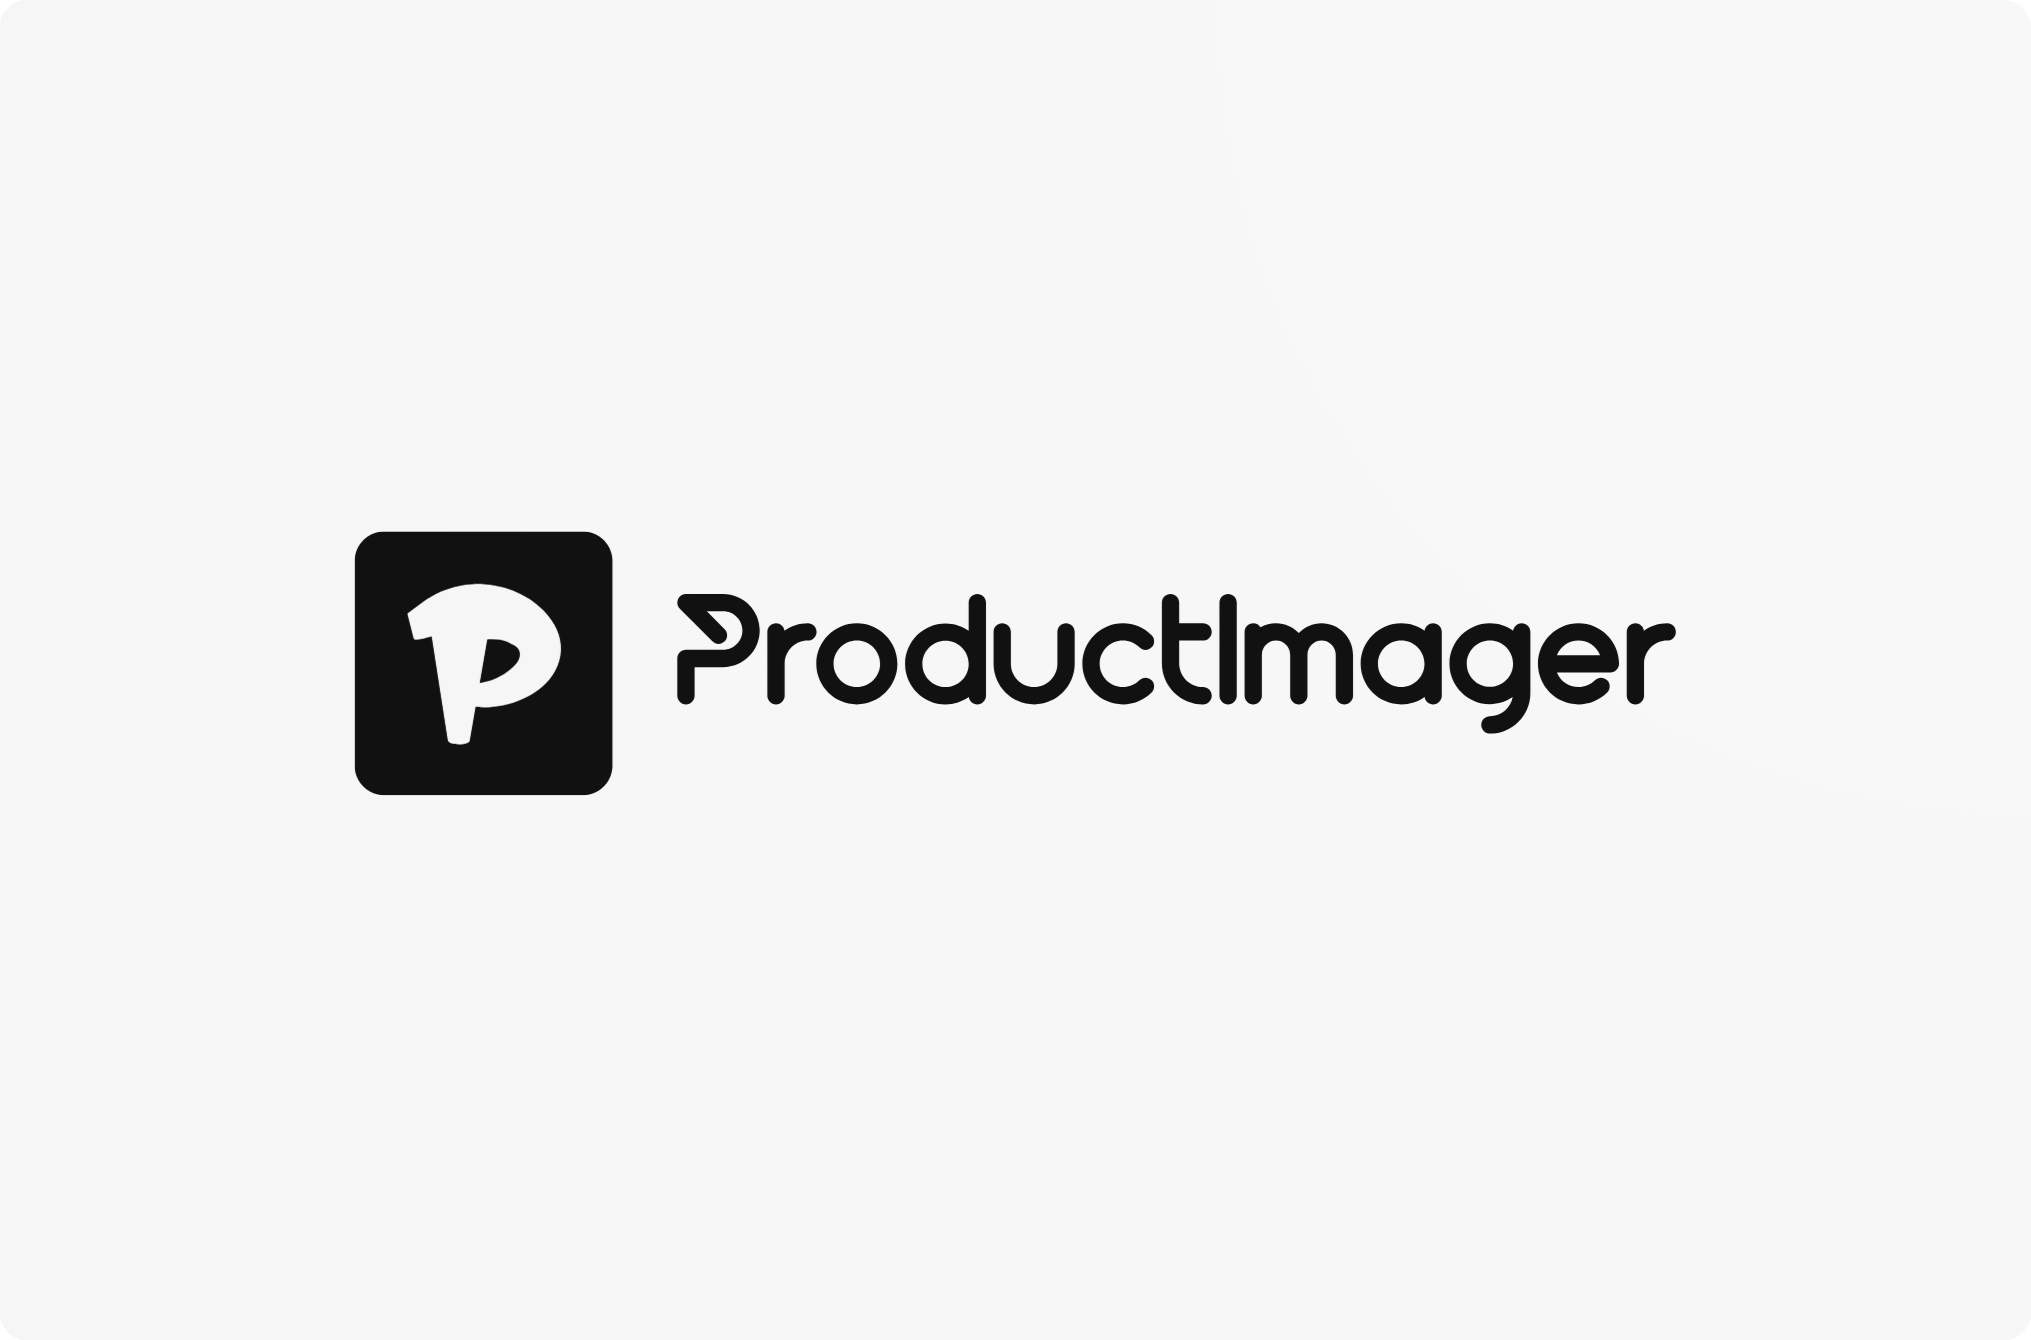 ProductImager